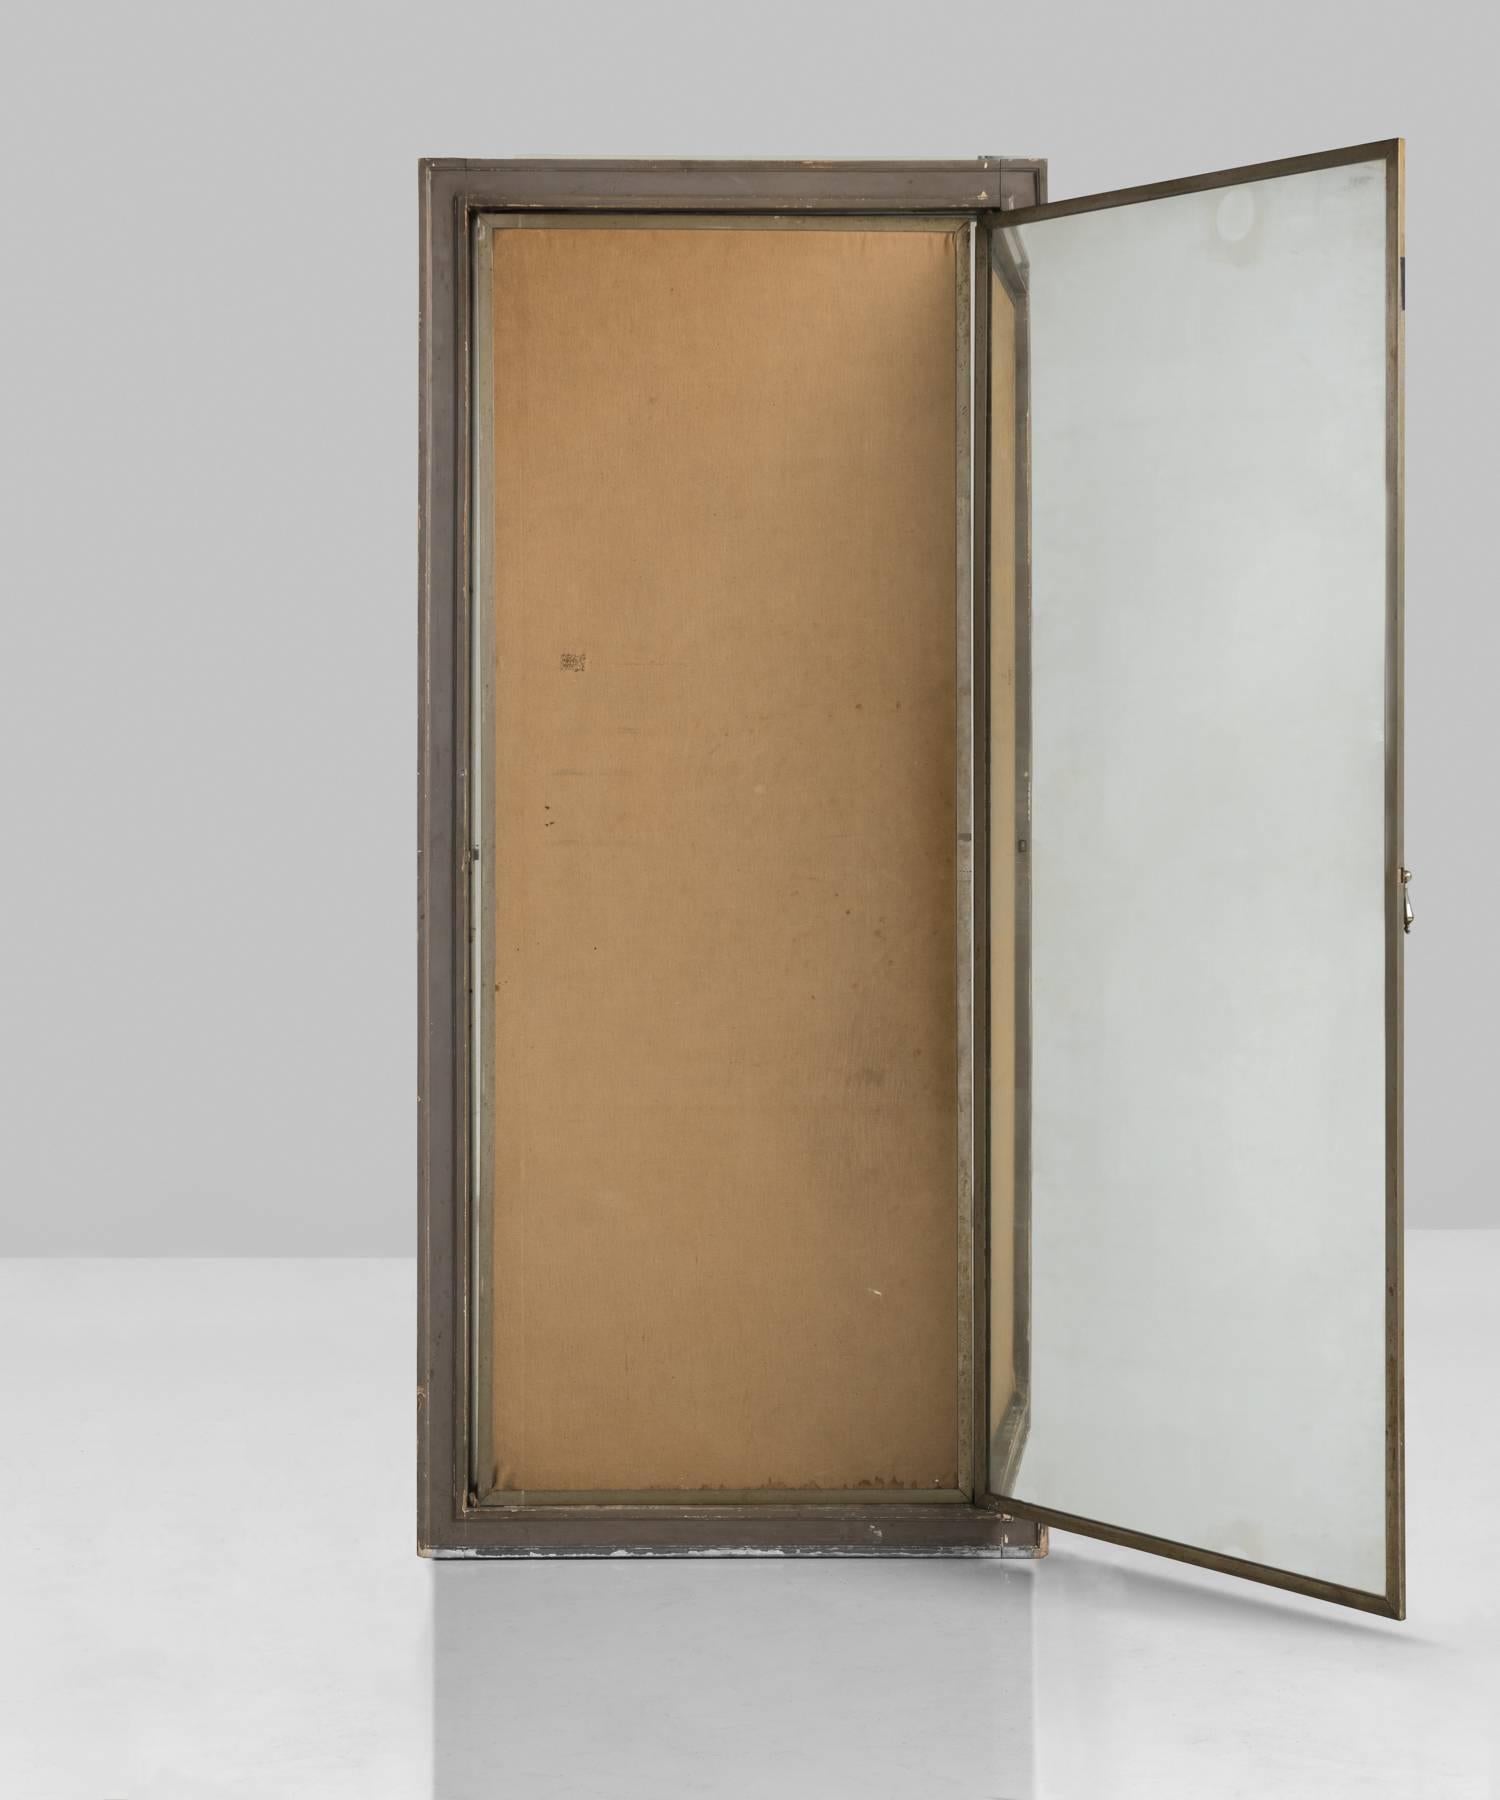 Original plate glass mirrors set within a collapsing brass framework, inset within a painted grey wood frame; natural linen backing to mirrors, France, circa 1920.